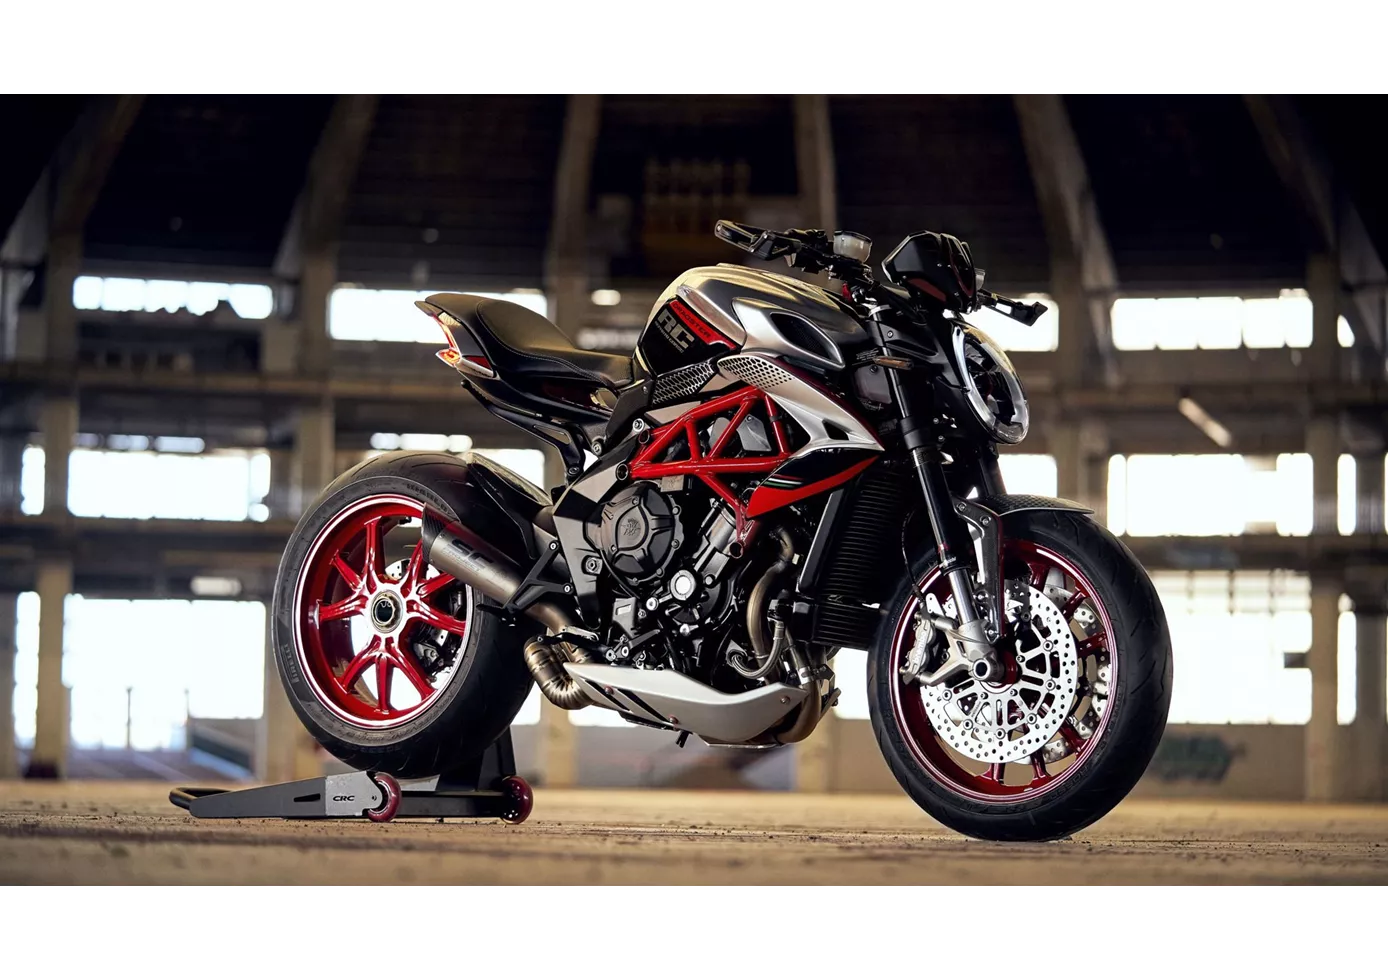 MV Agusta Dragster 800 RC SCS 2021